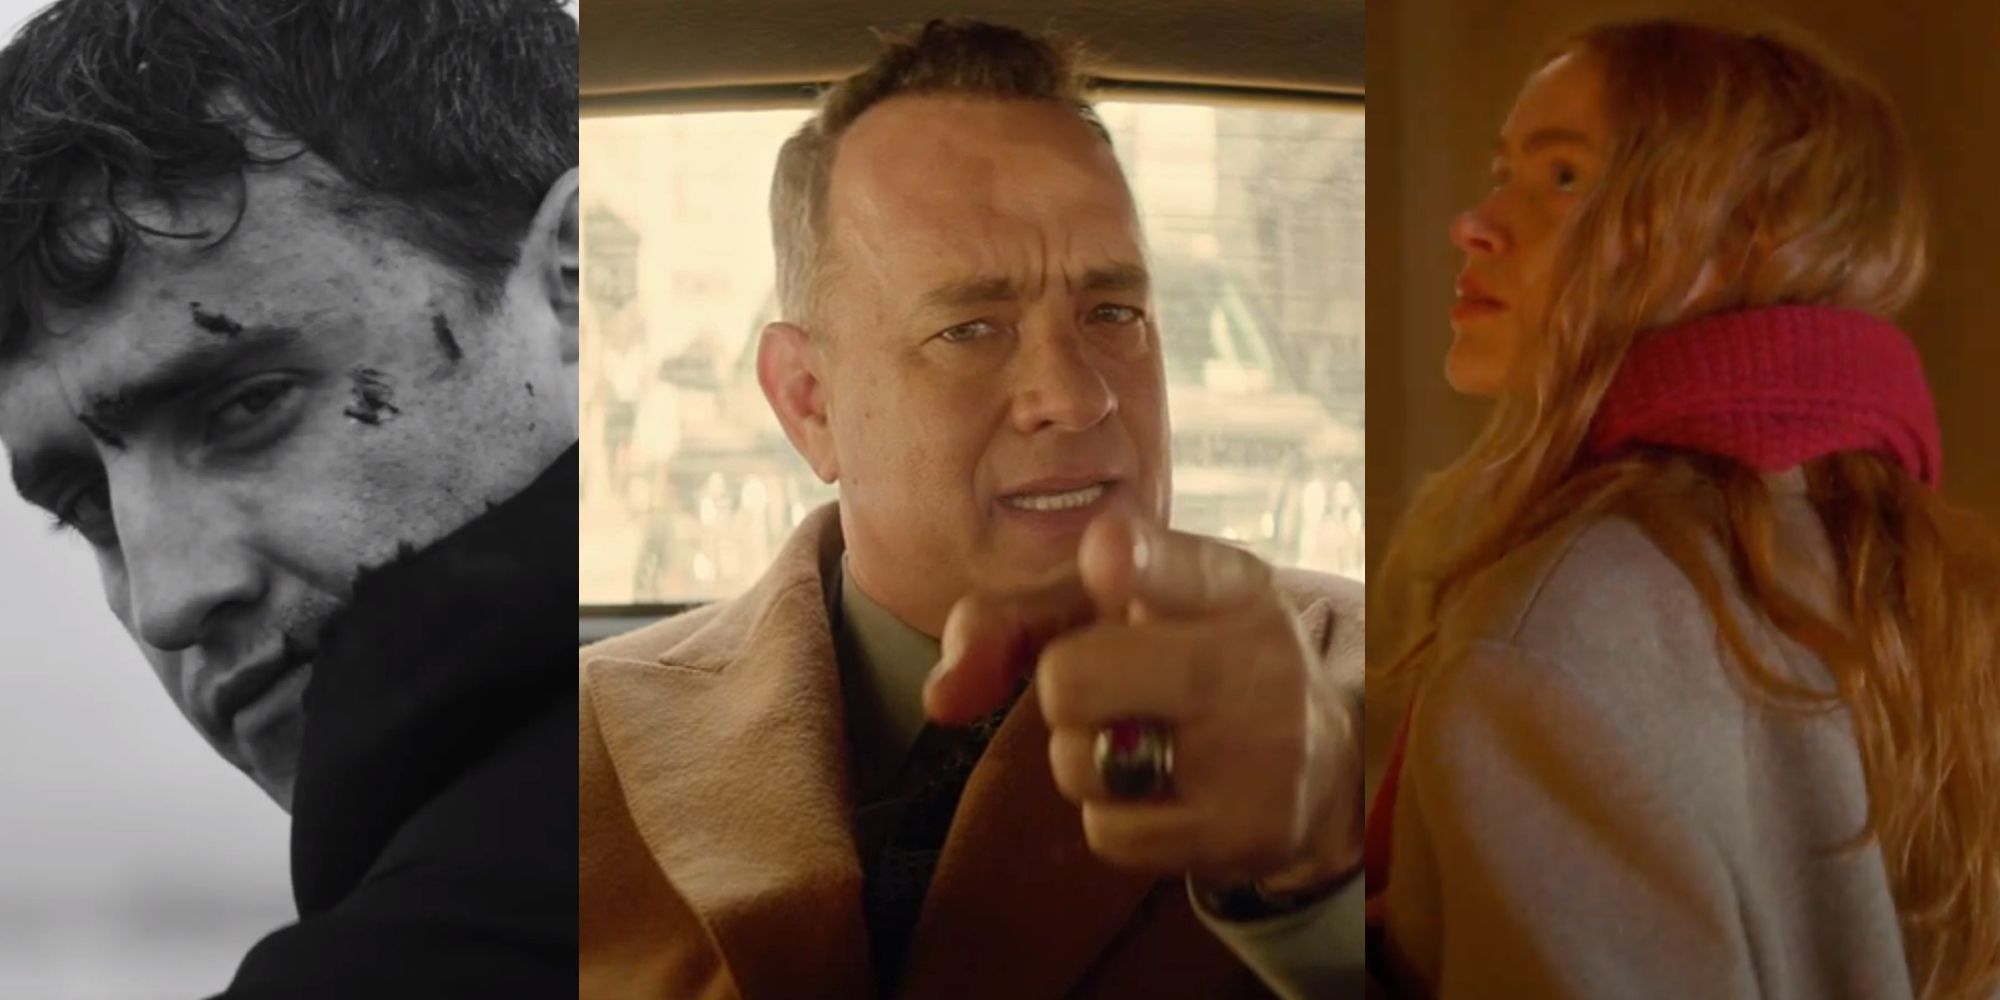 Paul Mescal beaten up in the Savior Complex video; Tom Hanks in a taxi in the I Really Like You video; Sadie Sink wearing a red scarf in the All Too Well video